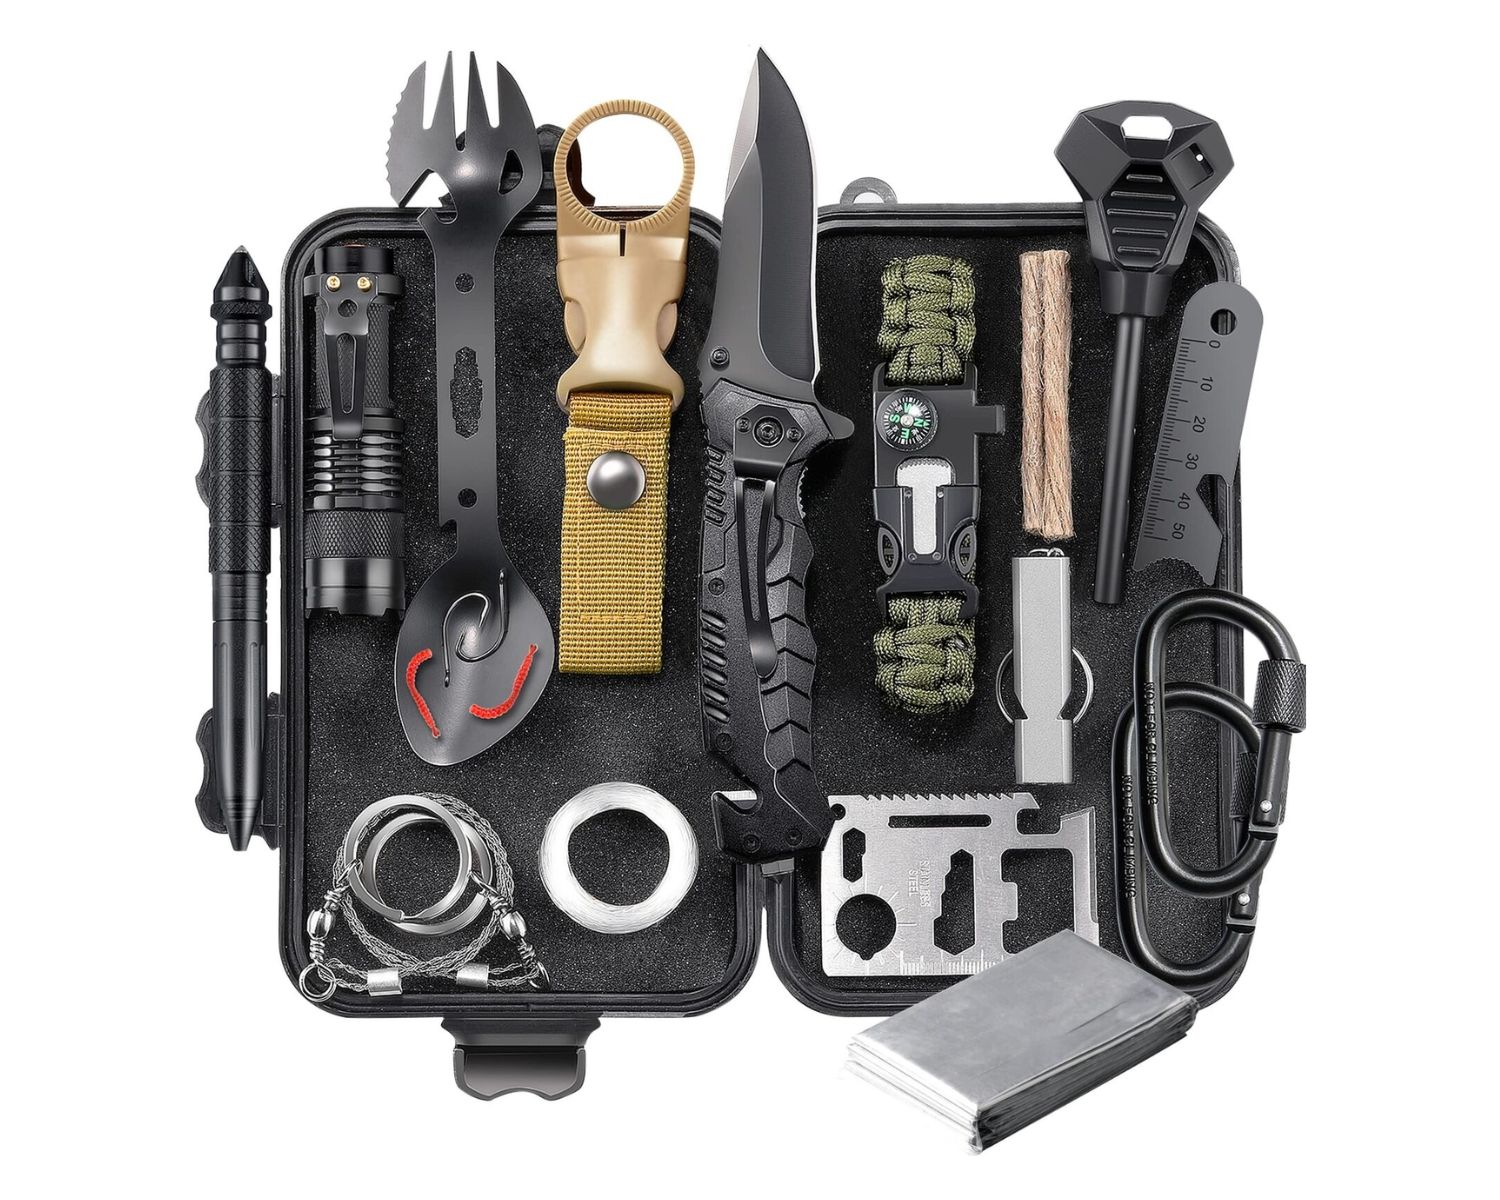 Survival Gear Kit Review: Essential Tools for Outdoor Preparedness